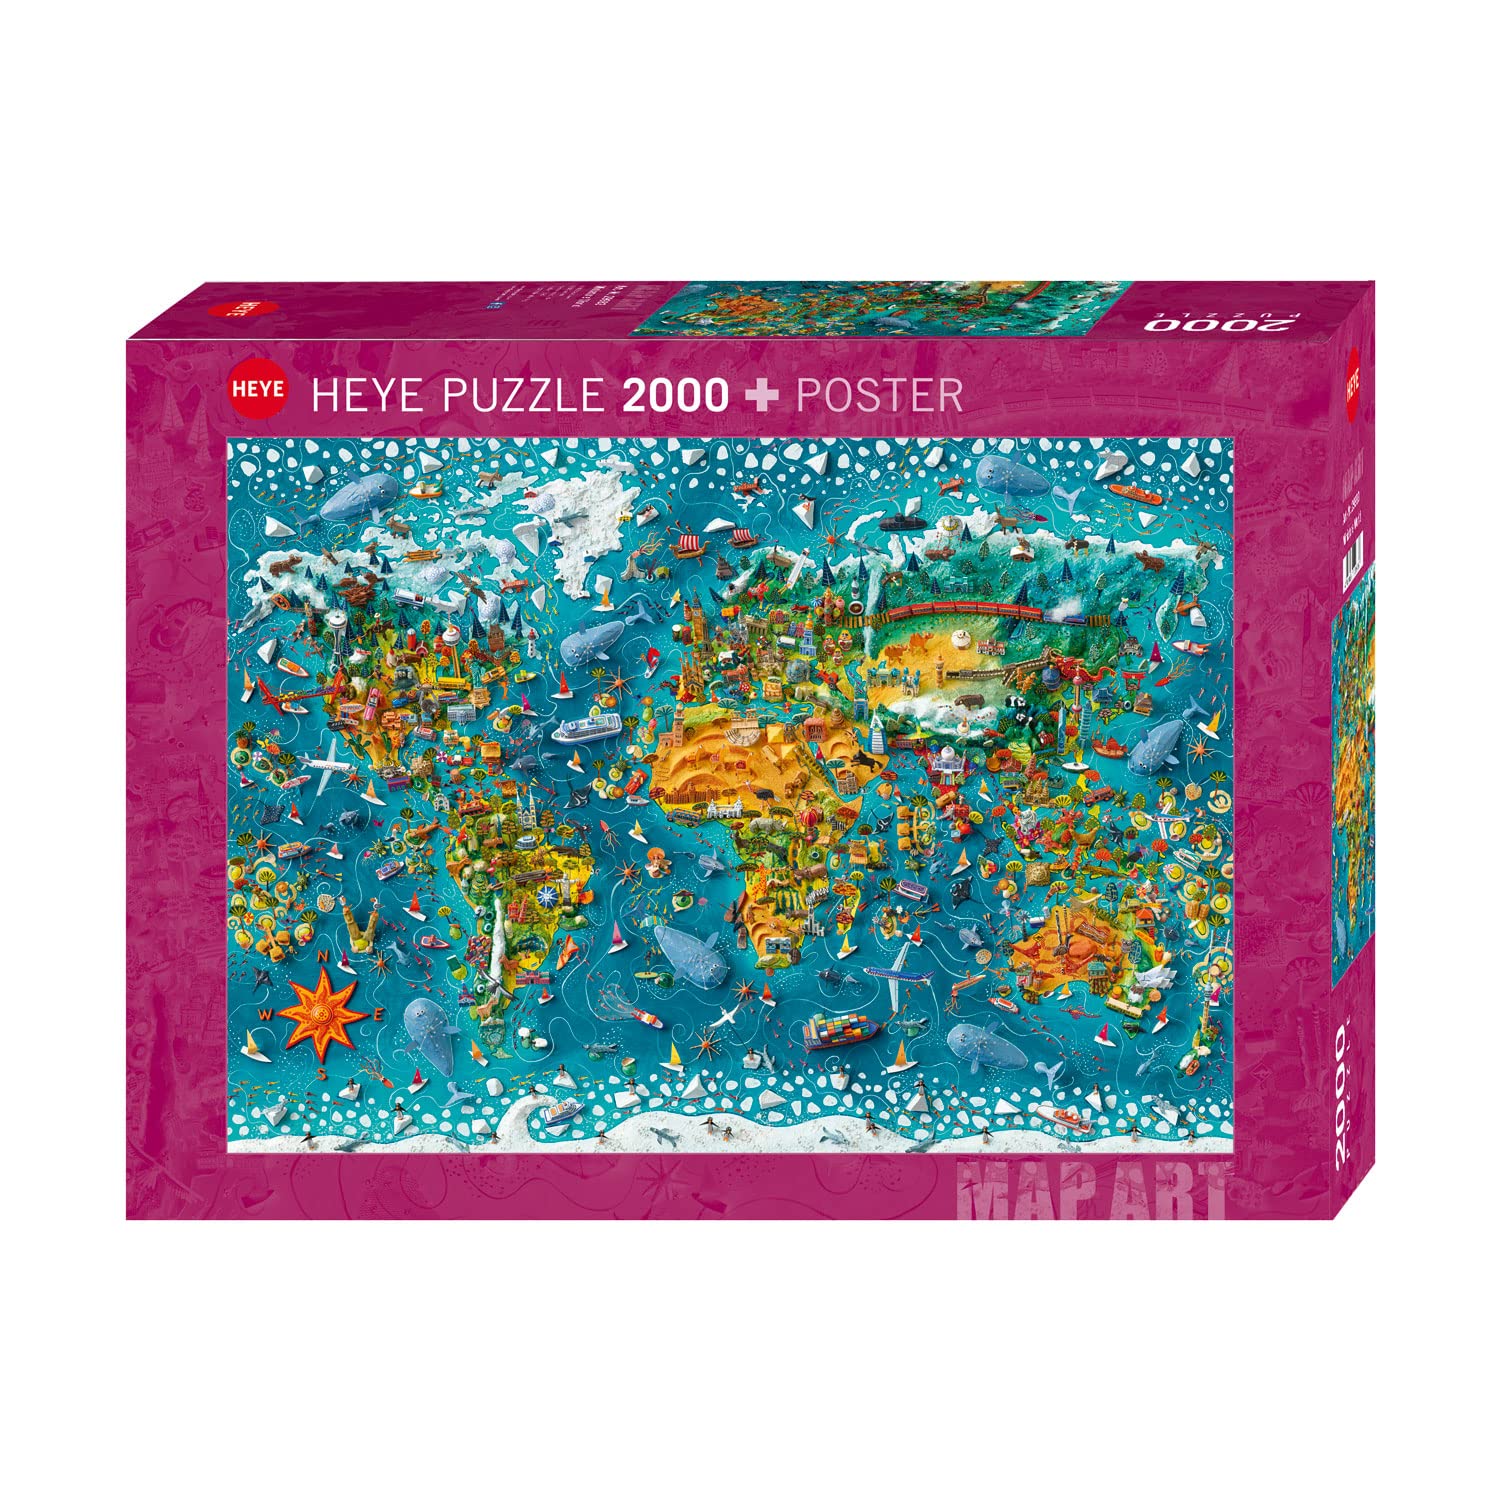 Heye Miniature World Puzzle, Teal/Turquoise Green